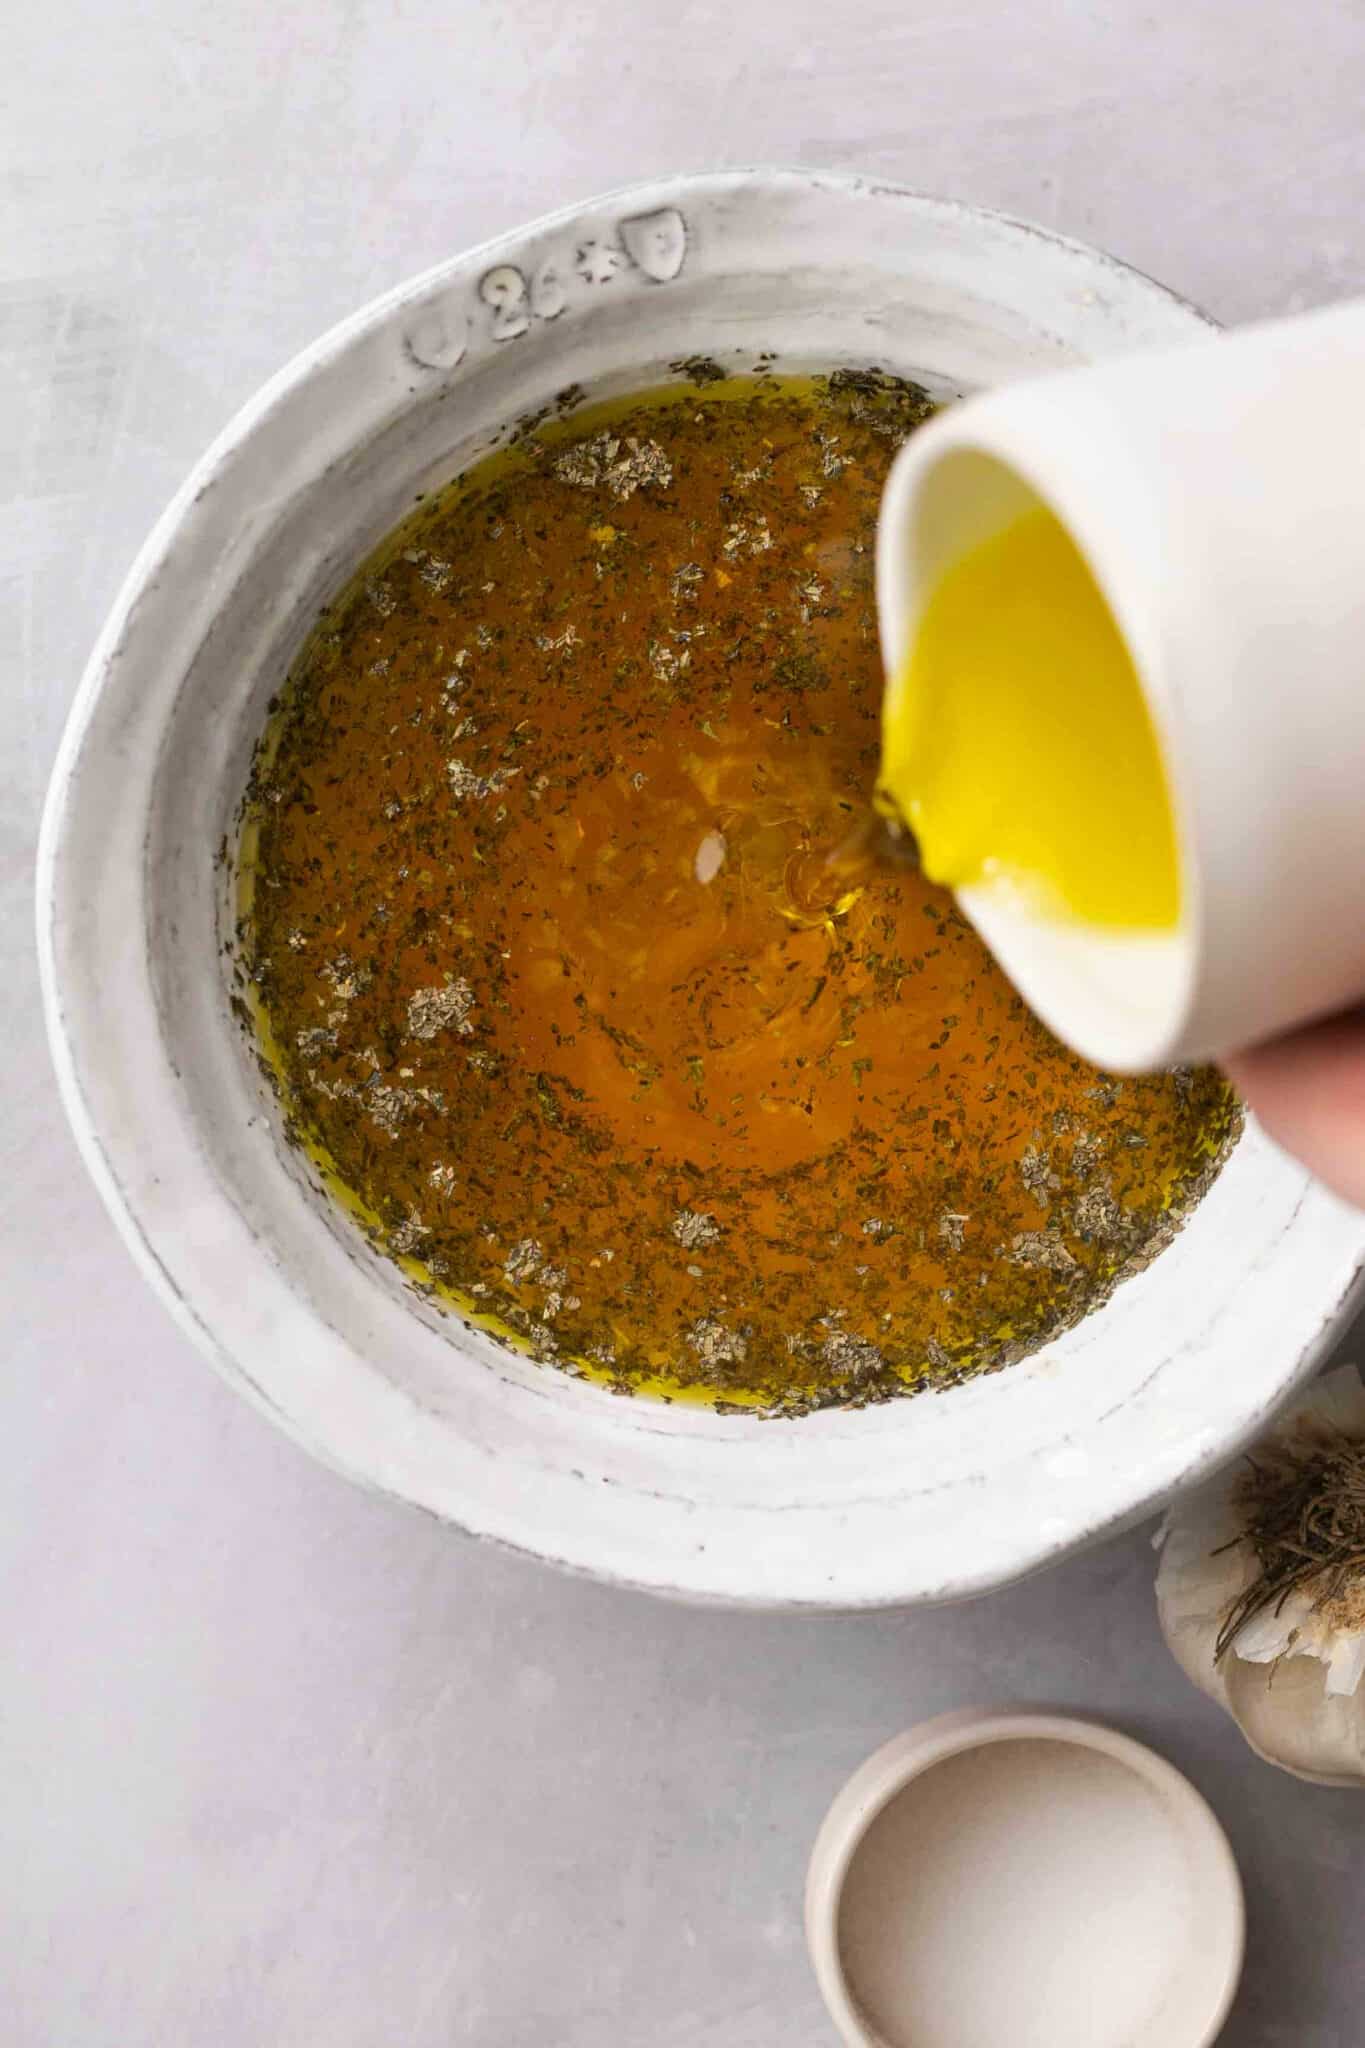 Pouring oil into bowl to make dressing.